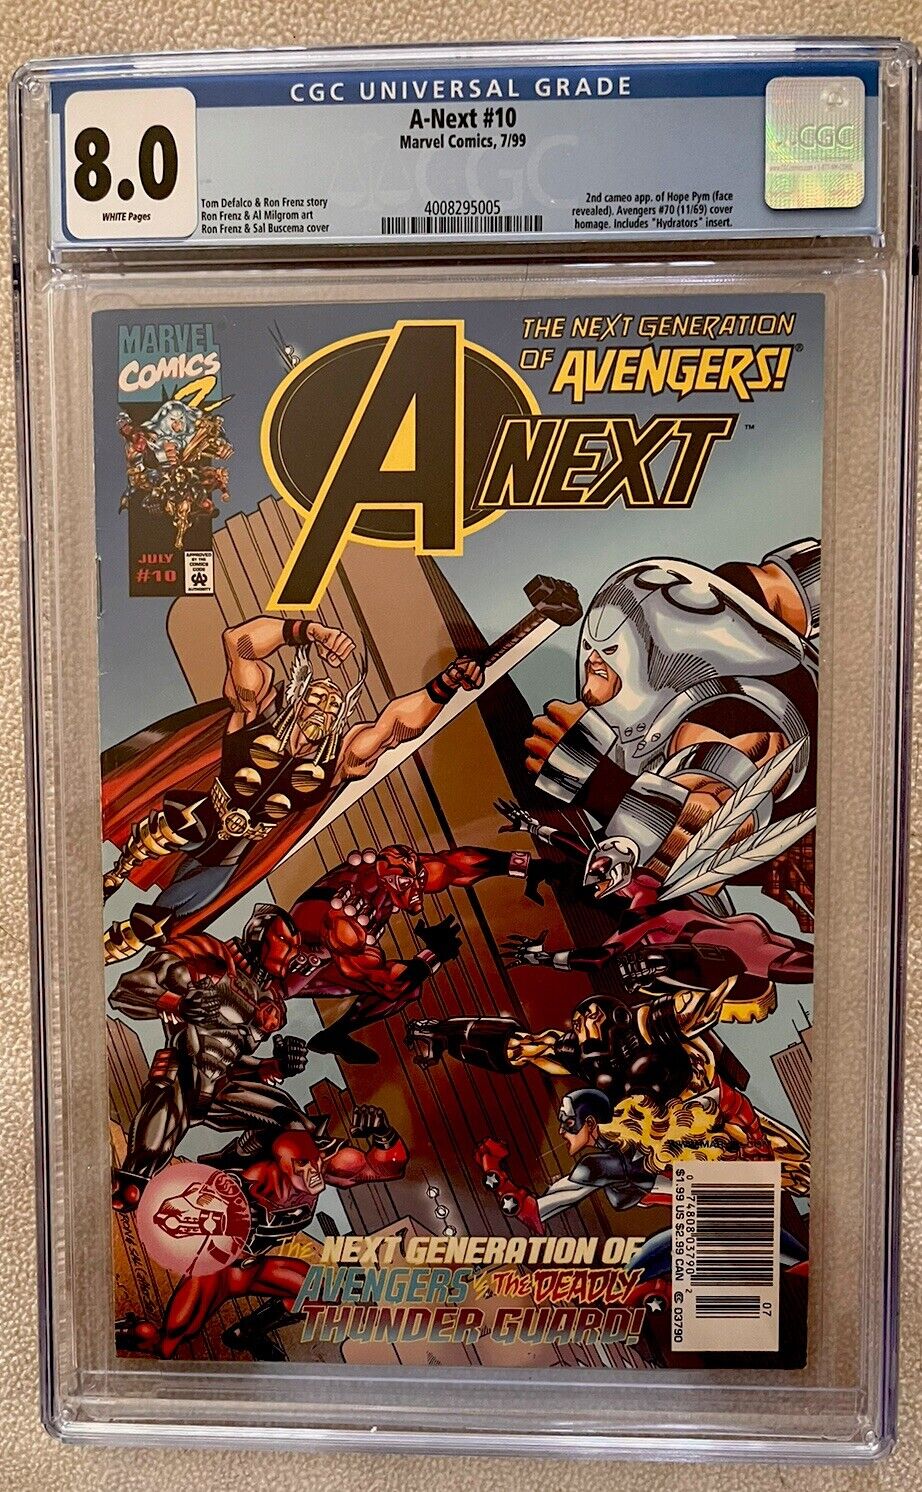 A-NEXT #10 2ND  CAMEO APP OF HOPE PYM (FACE REVEALED) CGC 8.0 KEY ISSUE